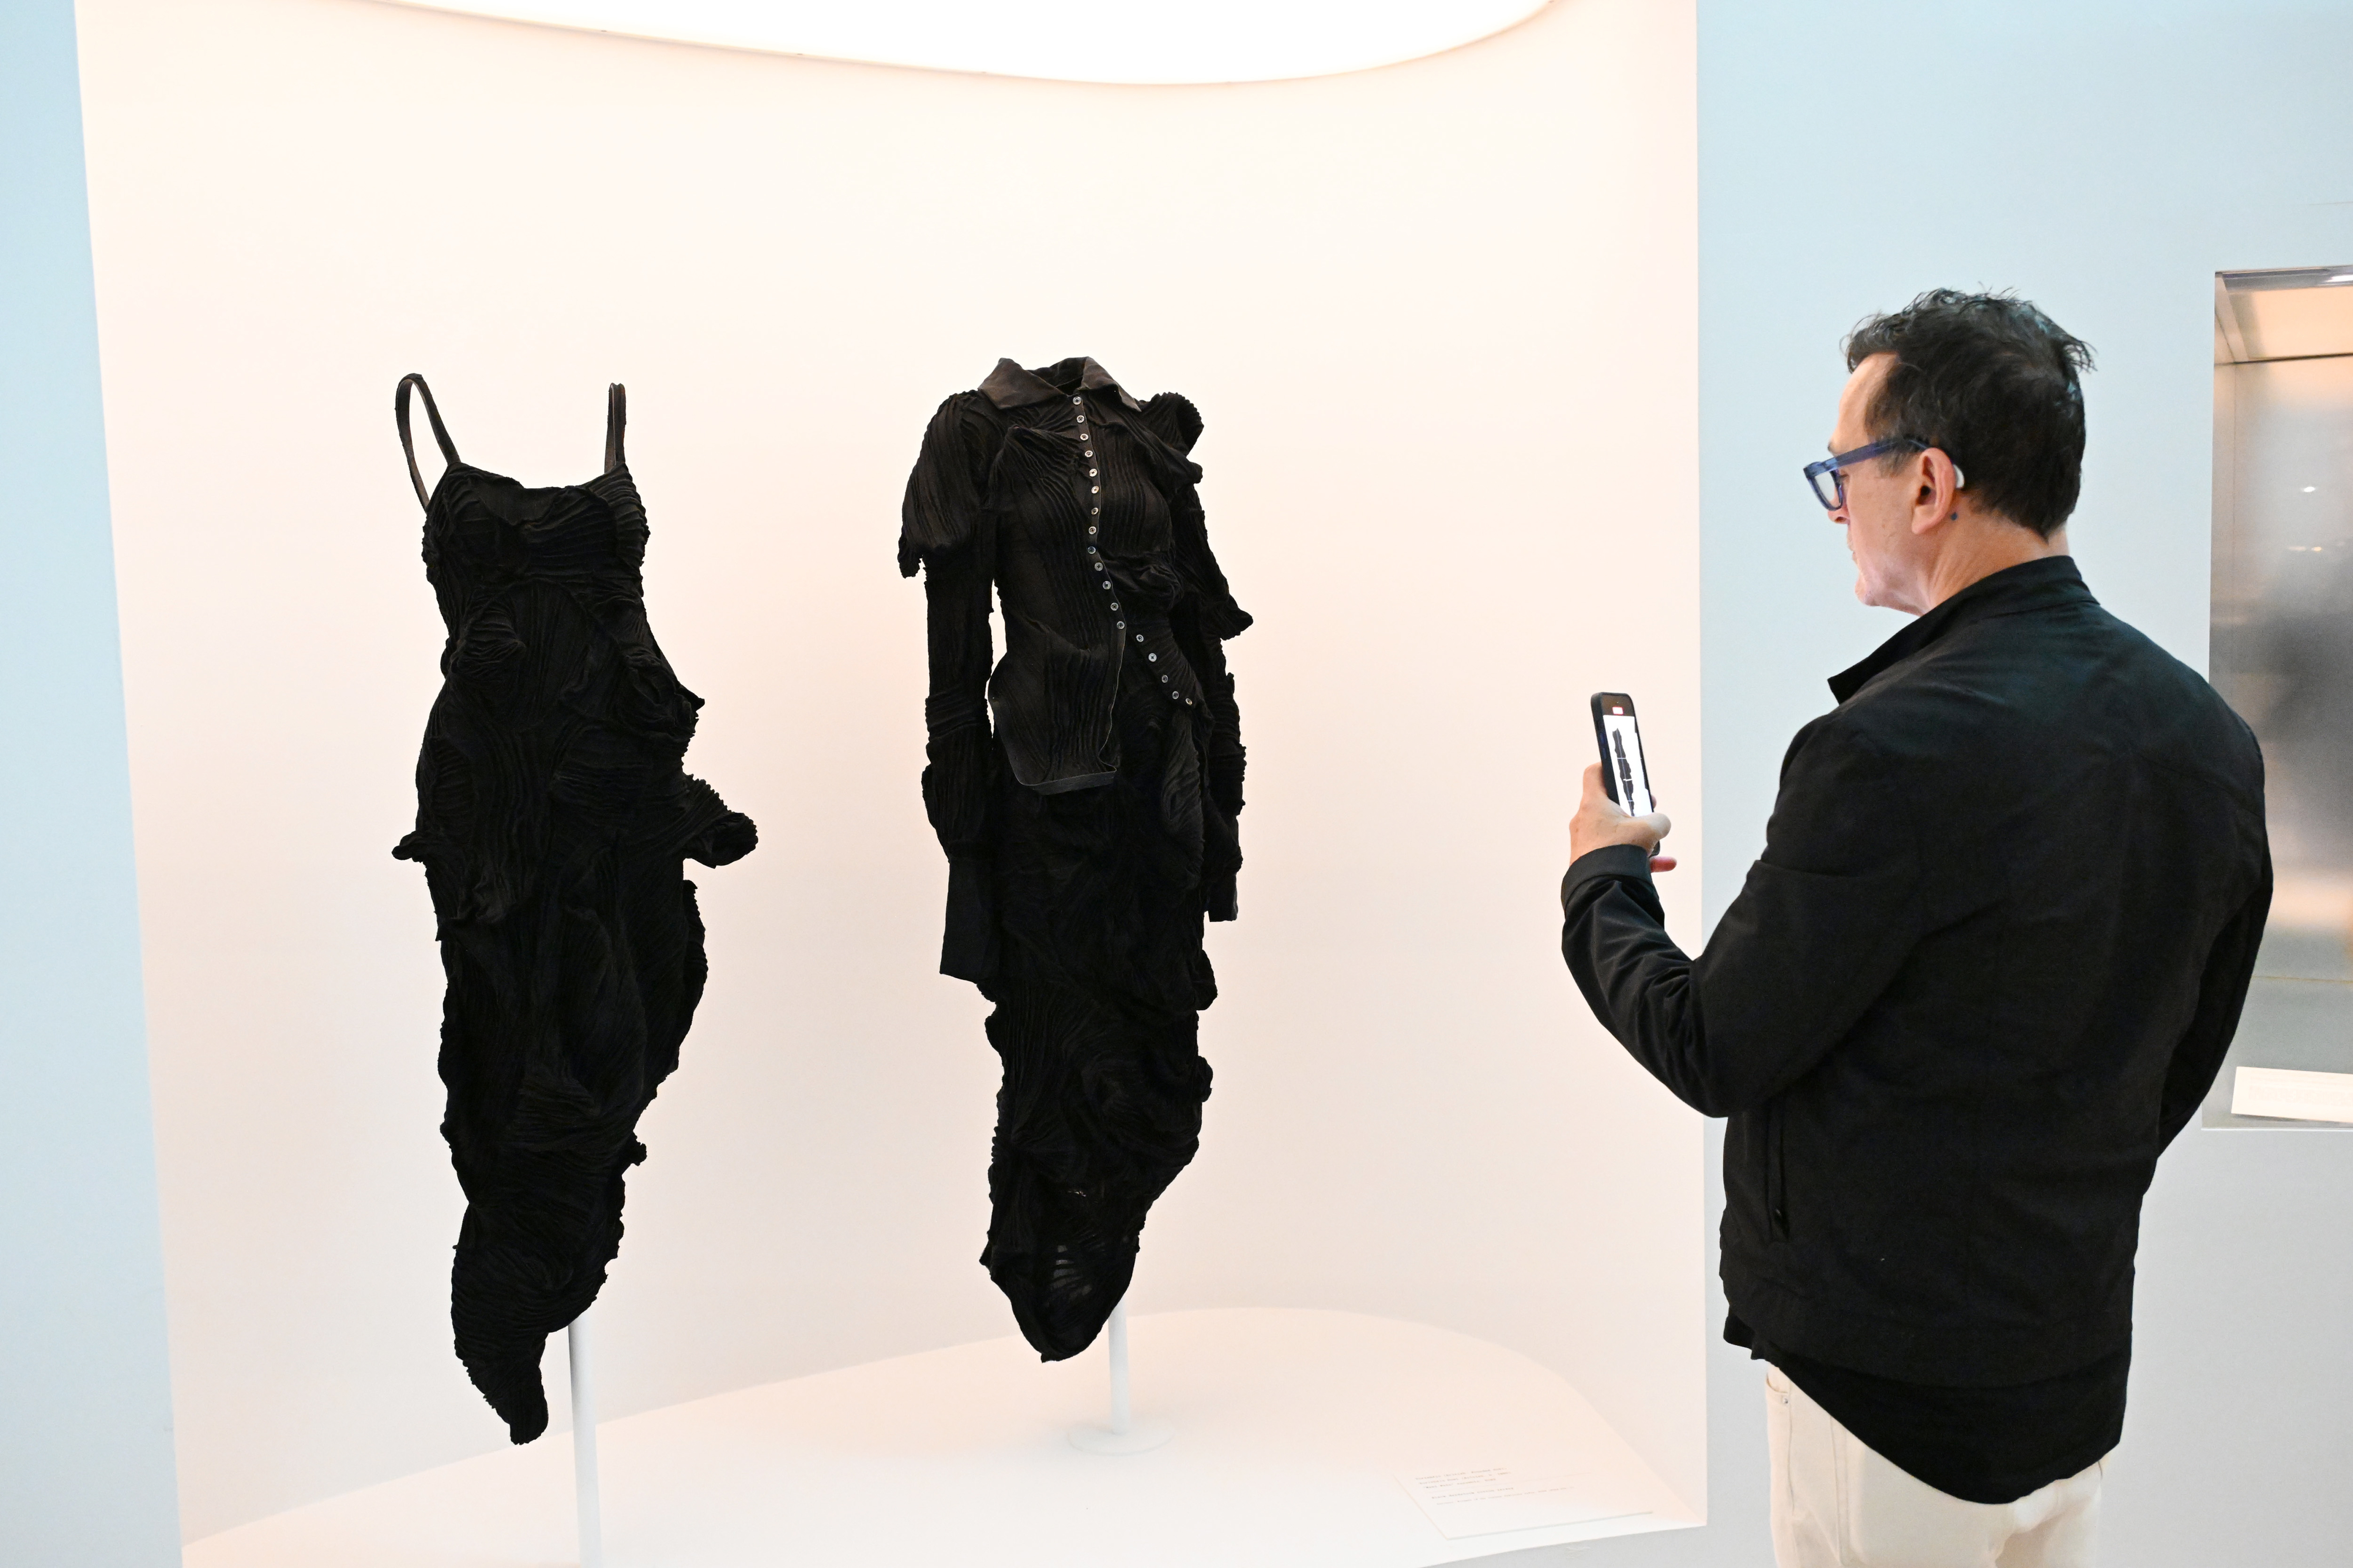 Man views two textured dresses on display at an exhibition, one with a ruffled design, capturing them with his smartphone